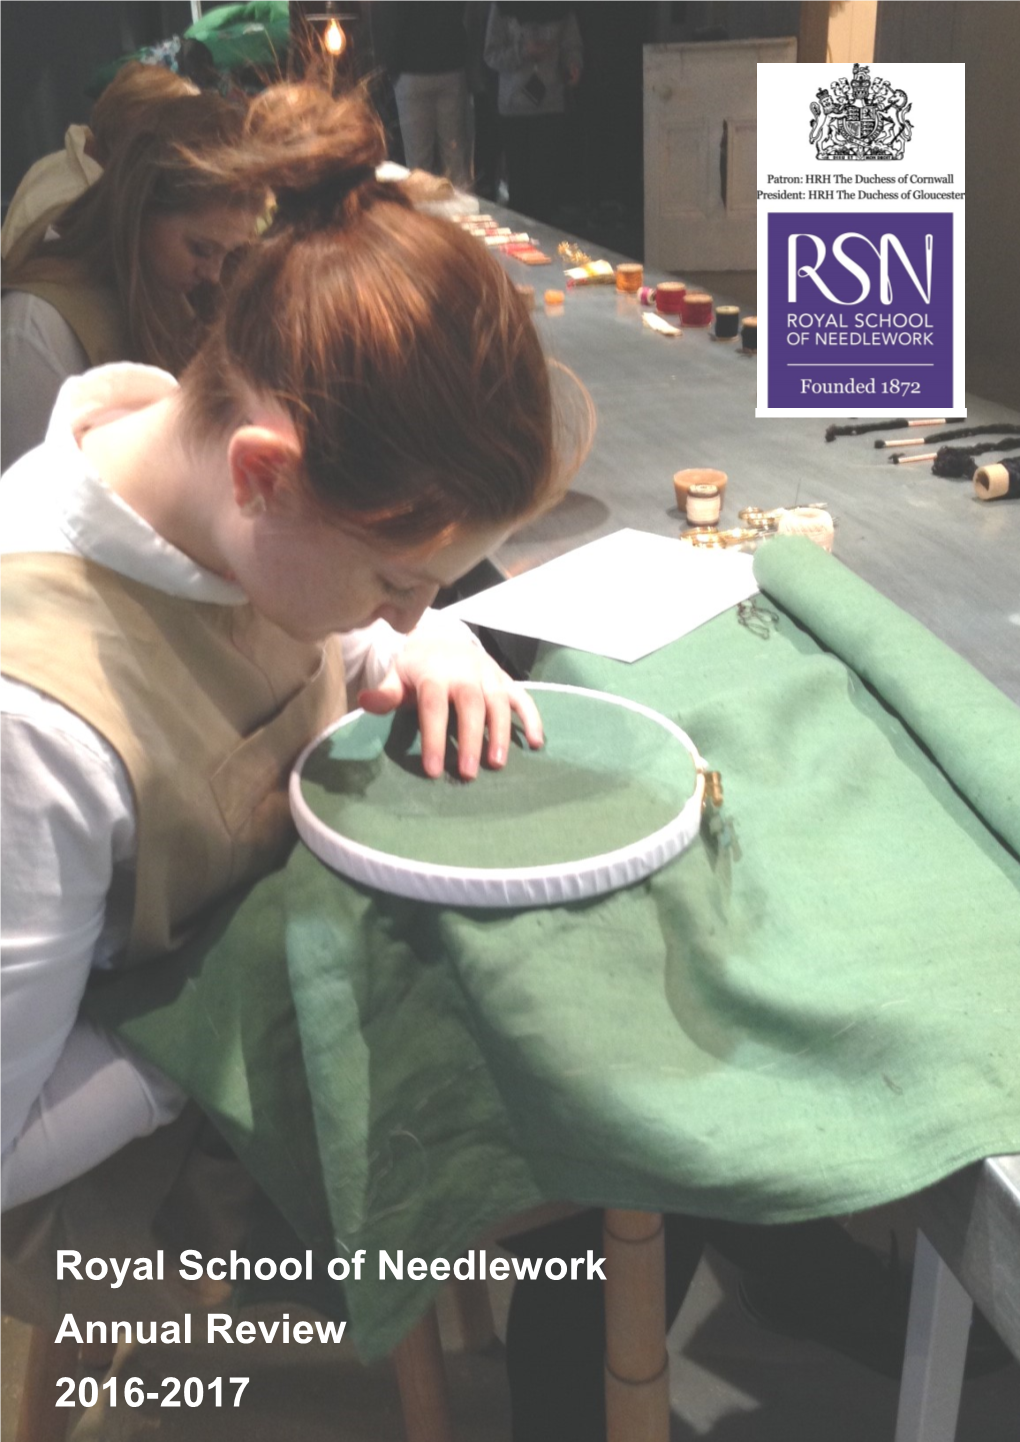 Royal School of Needlework Annual Review 2016-2017